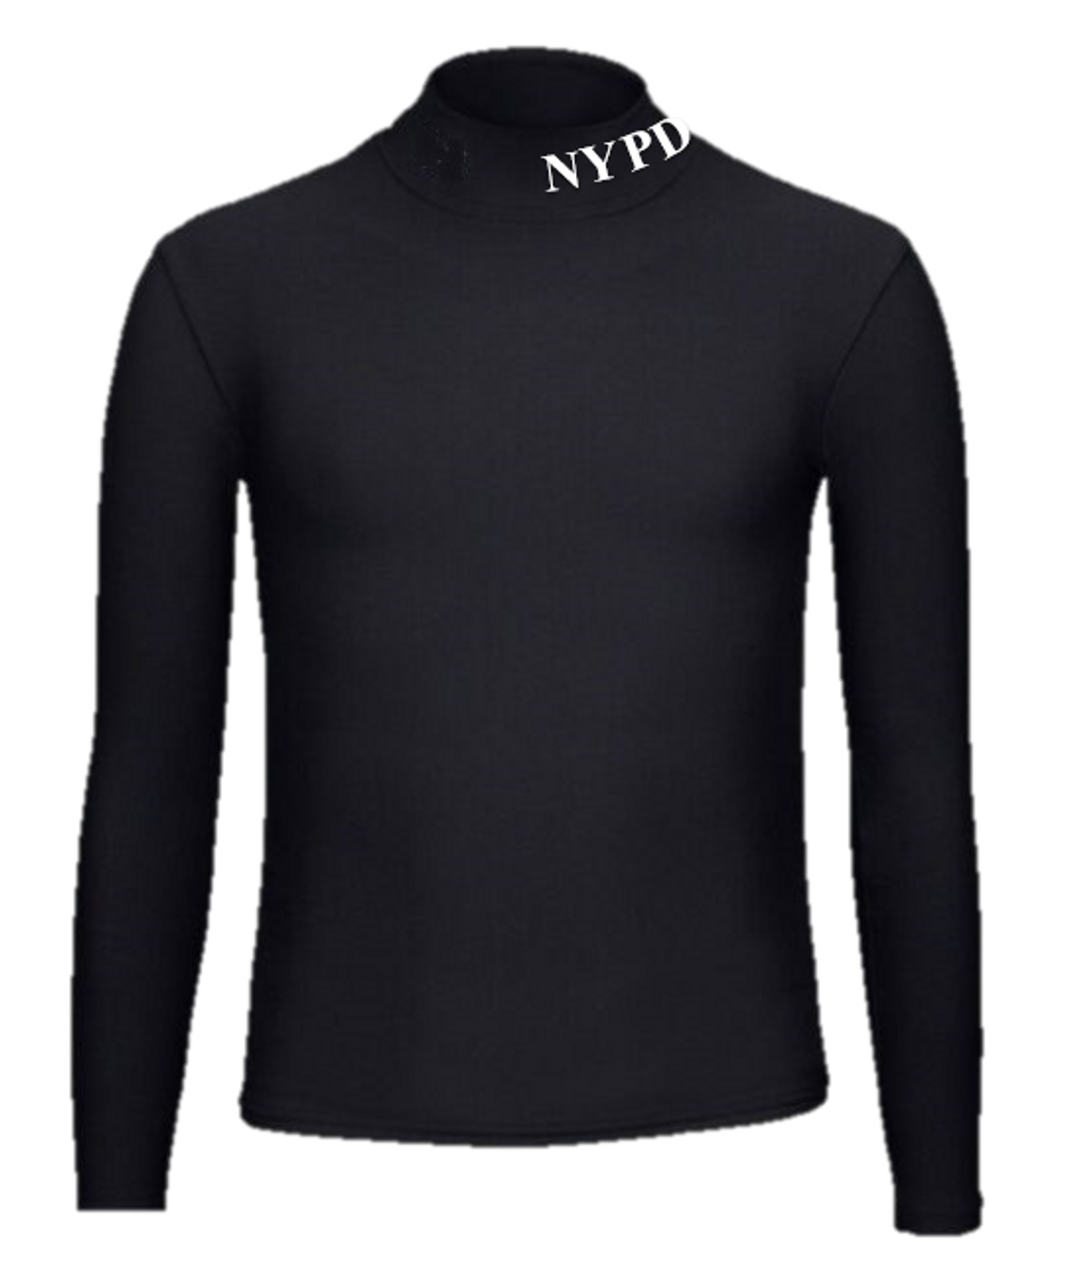 NYPD Under Armour Mock neck - Meyers 